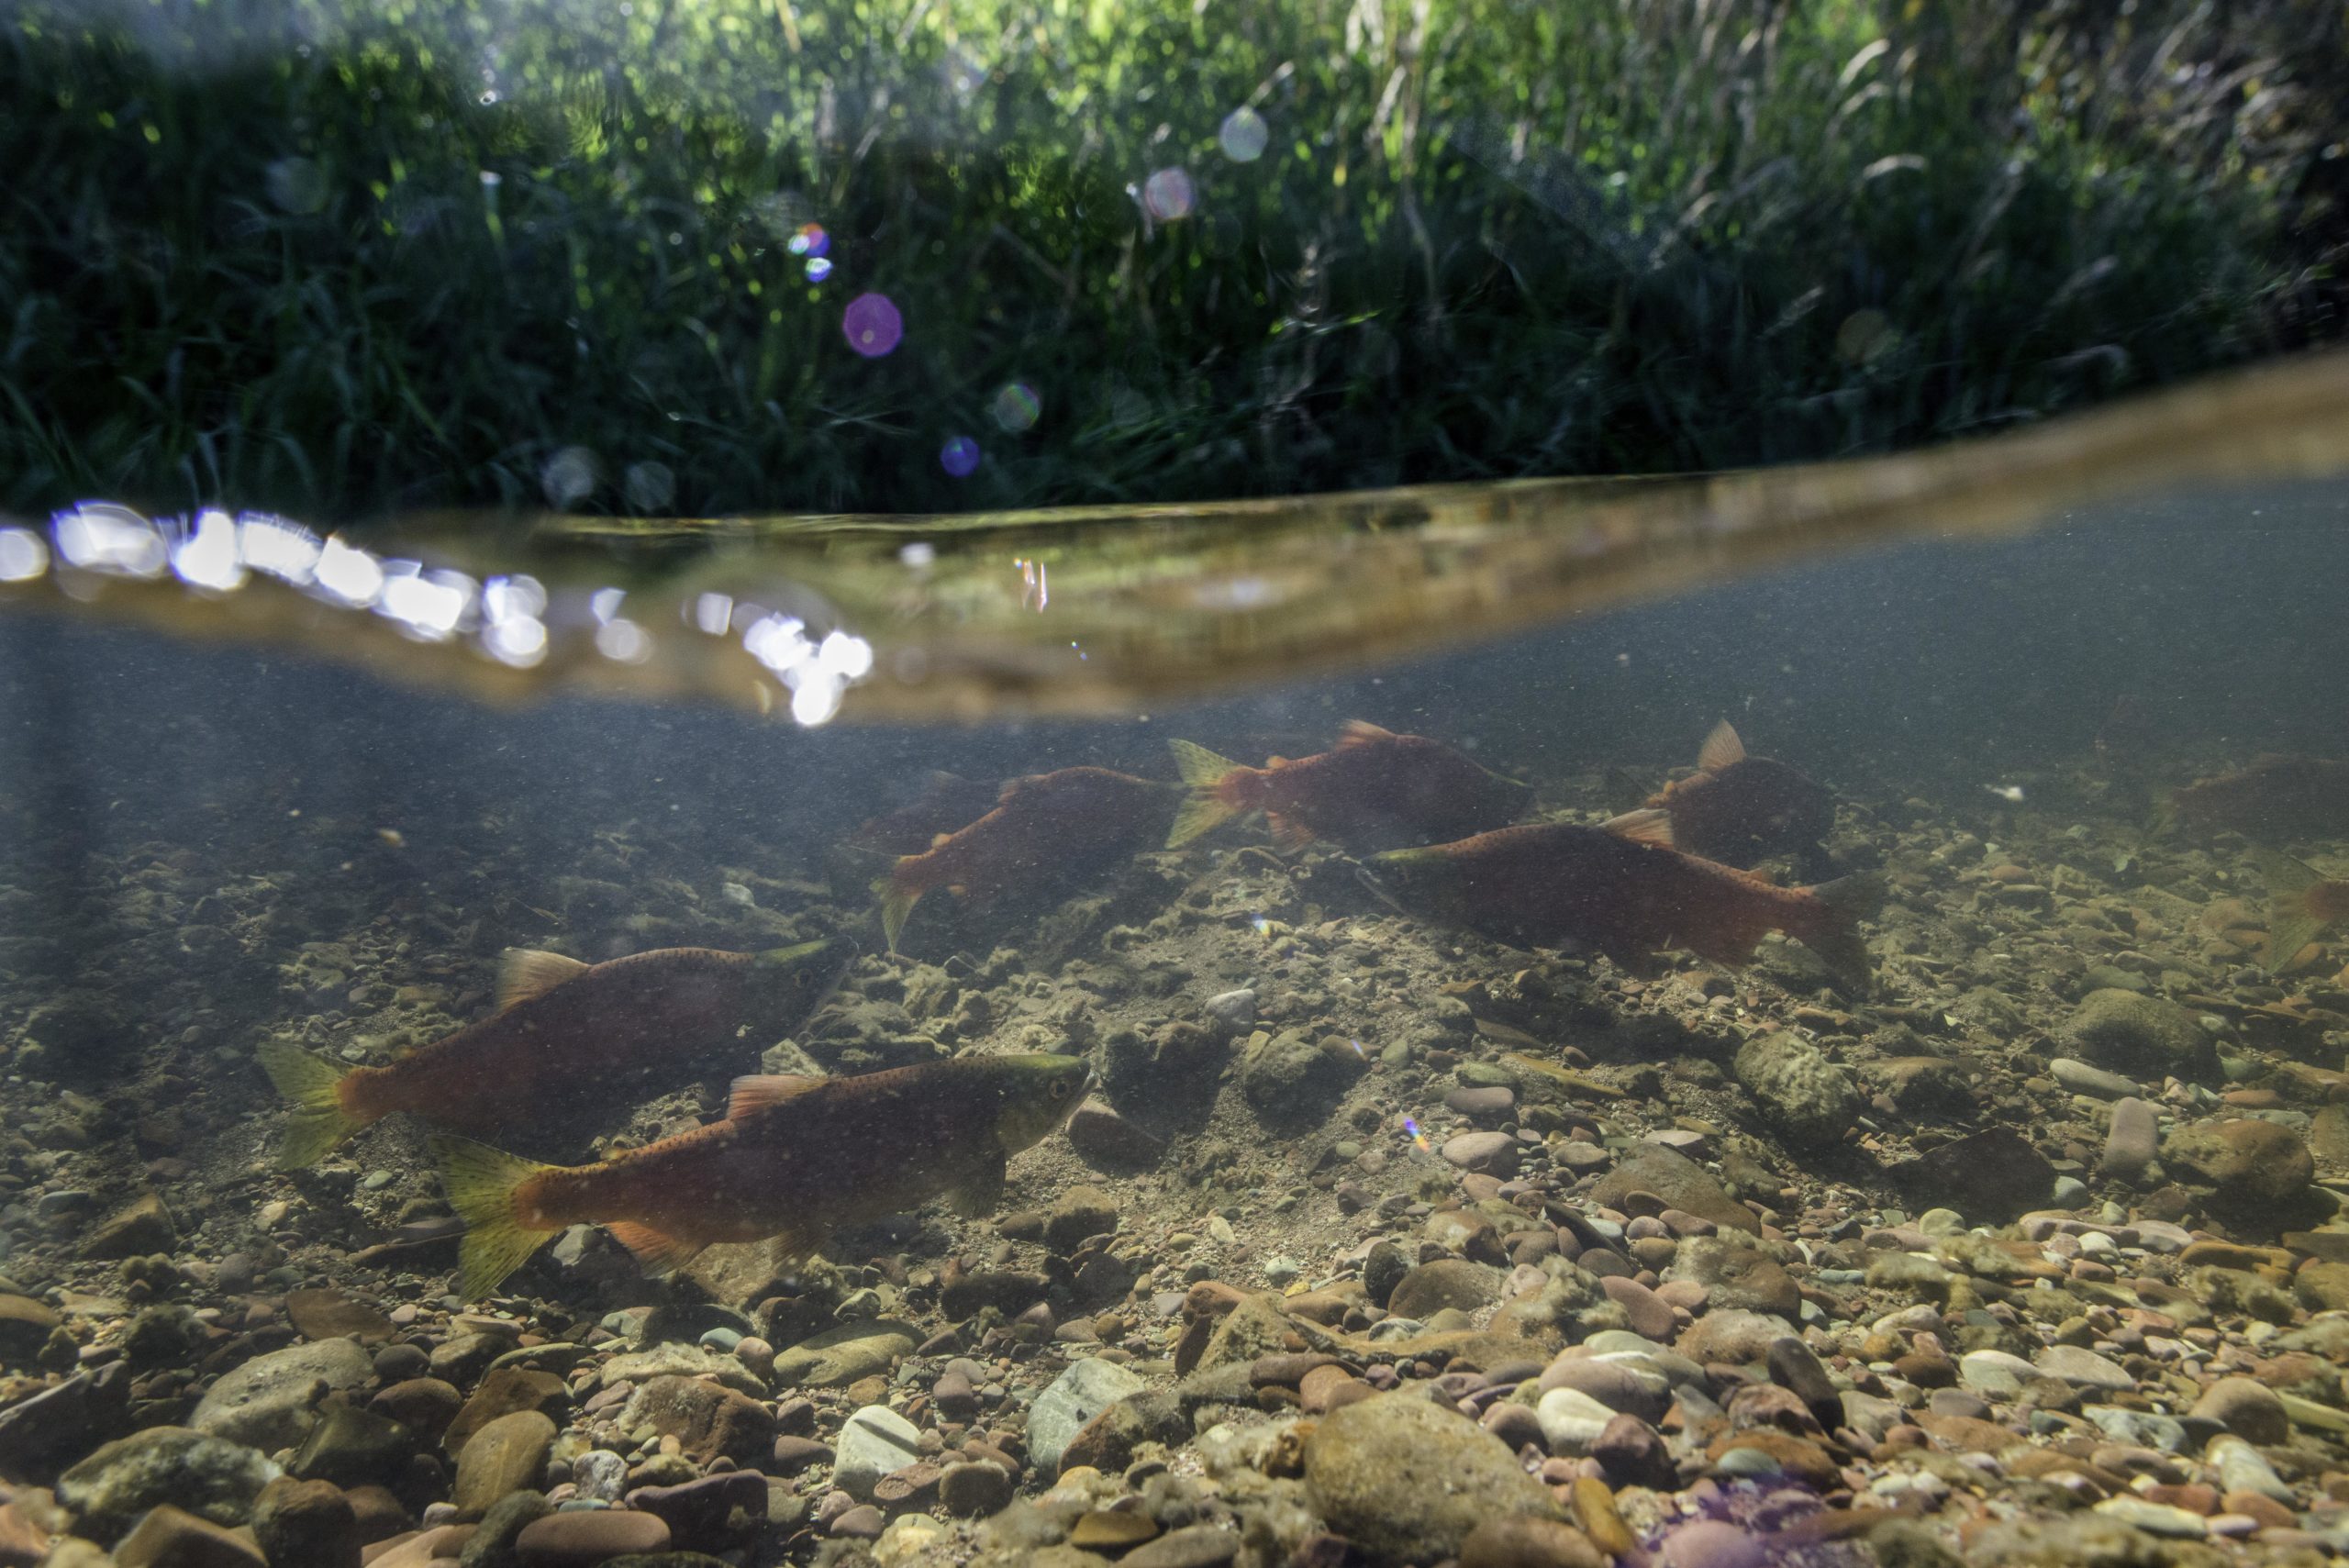 A Field Guide to Freshwater Fish Watching